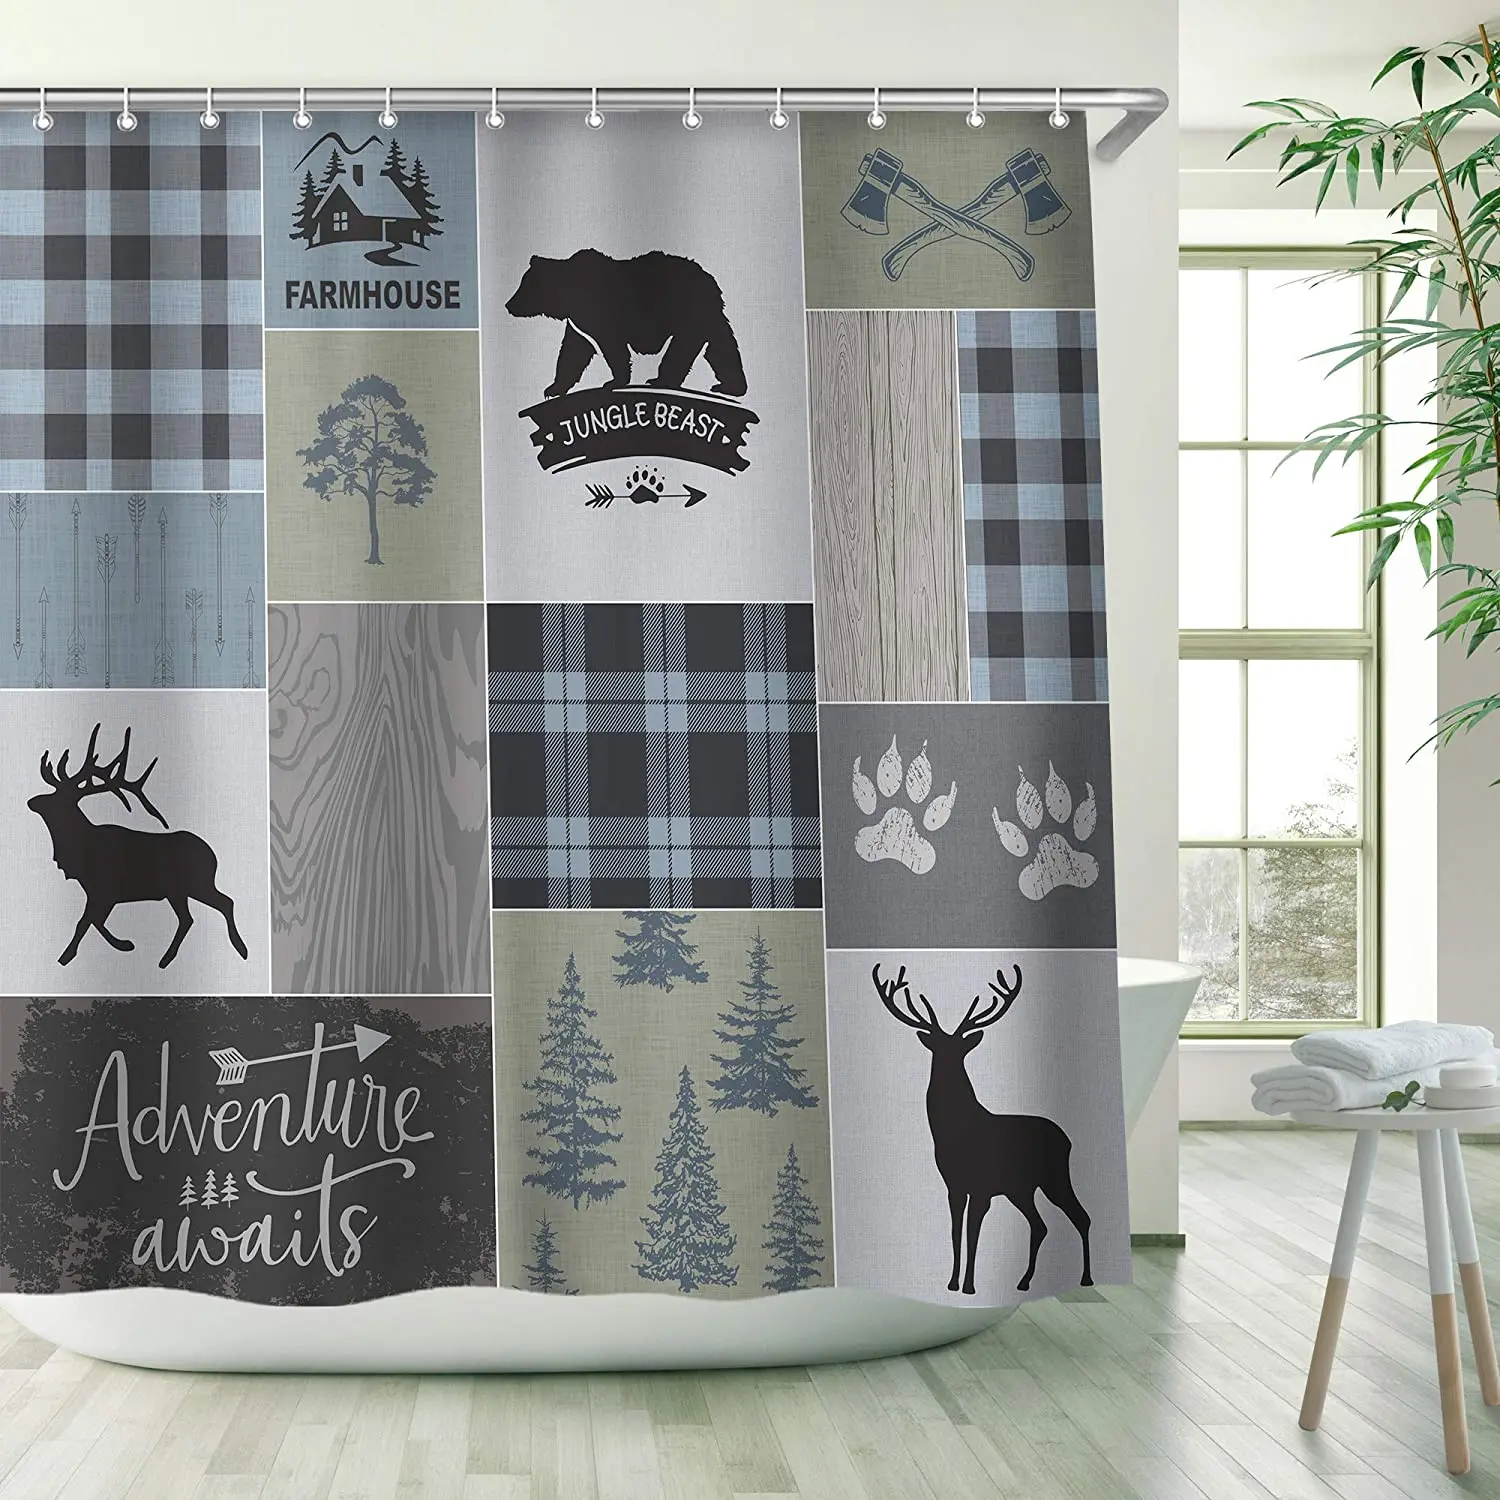 

Cabin Shower Curtain Farmhouse Rustic Bear Deer Country Lodge Cowboy Curtains with Hooks Grid Claw Wildlife Adventure for Men